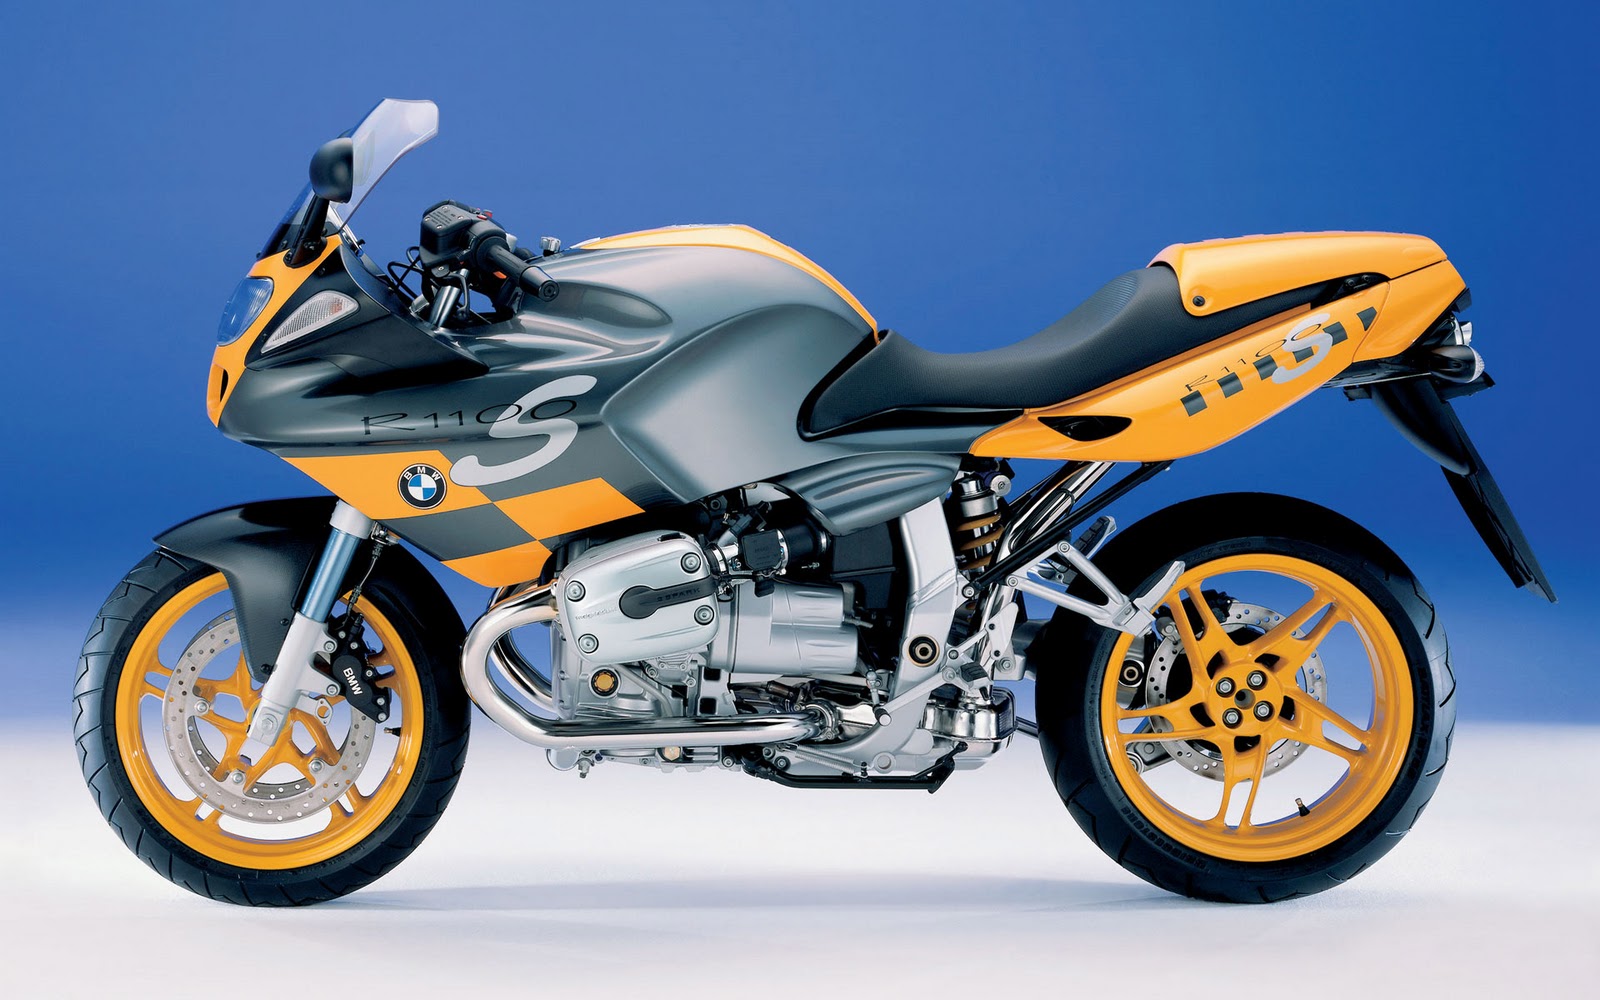 bikes auto media: BMW Motorcycles Latest Images View